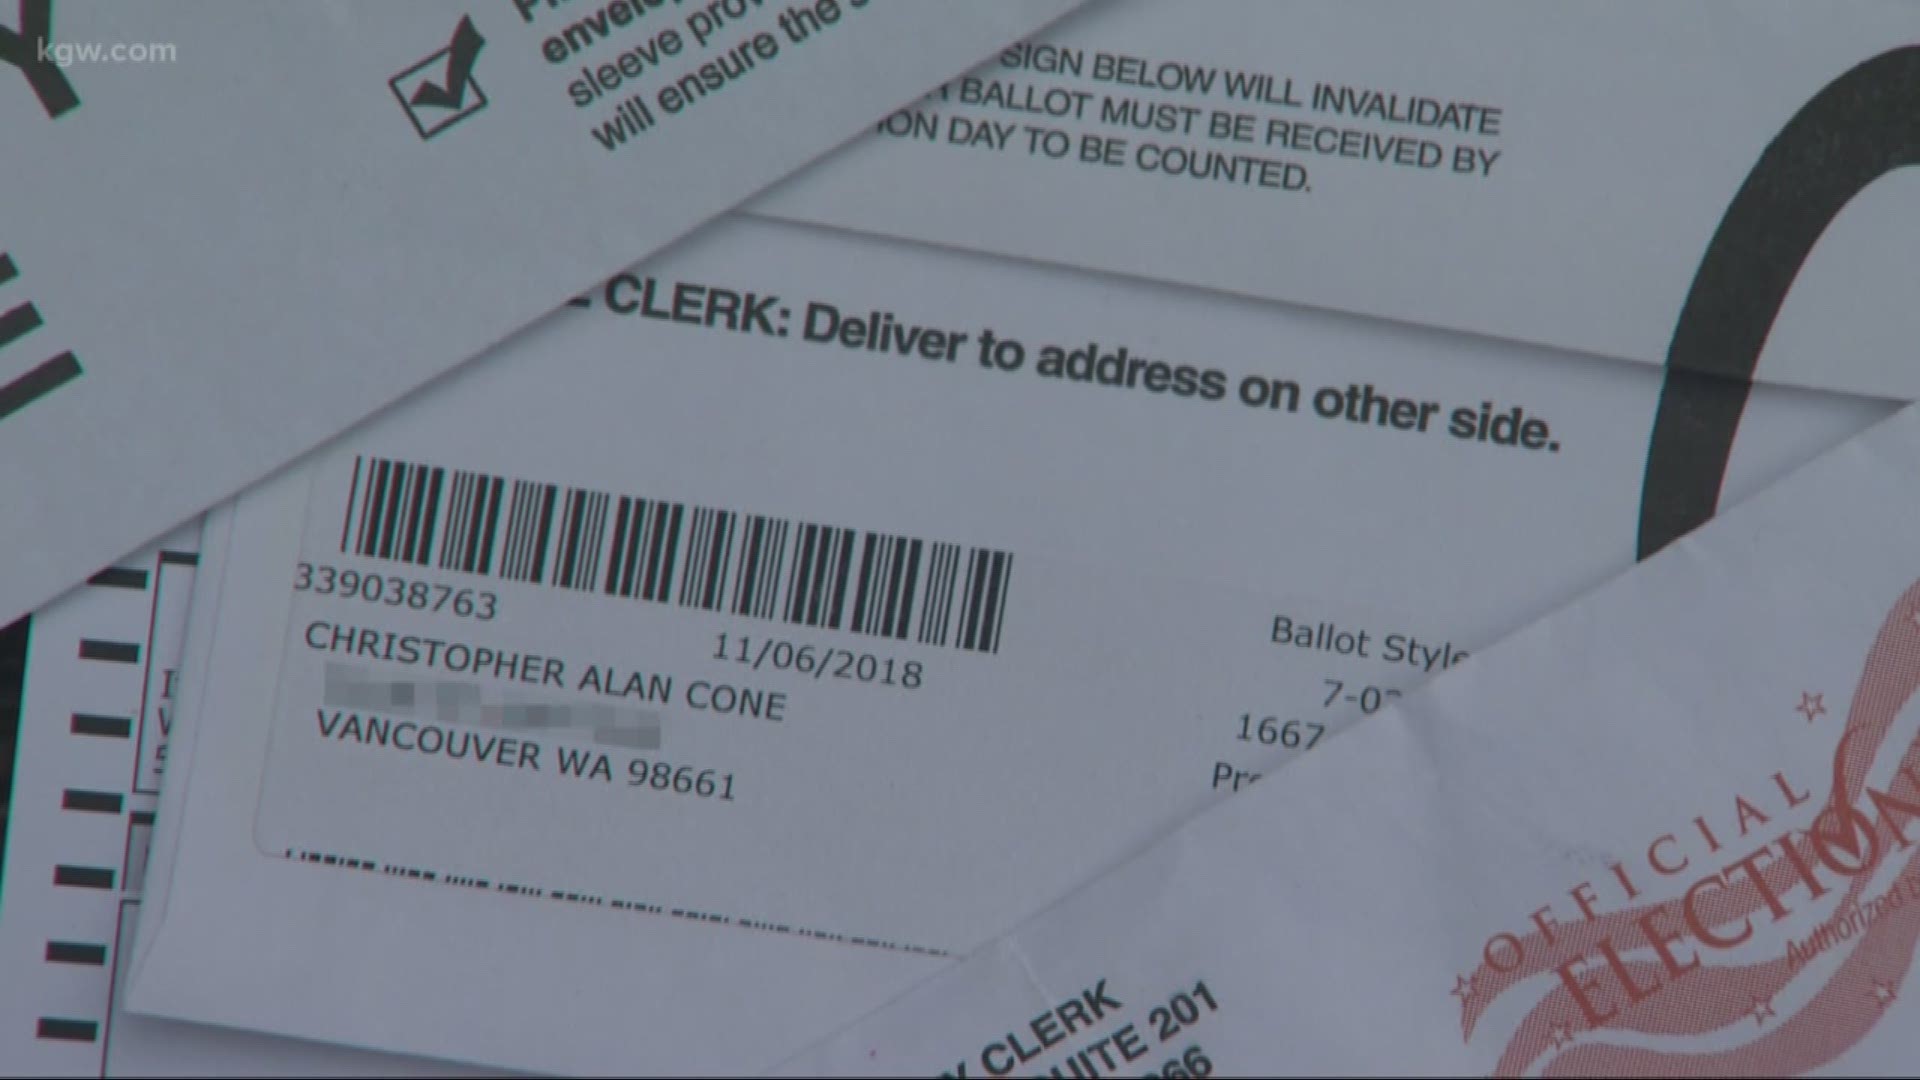 A Washington man said it's been 20 years since he last lived in Oregon and he still receives an Oregon ballot in the mail.